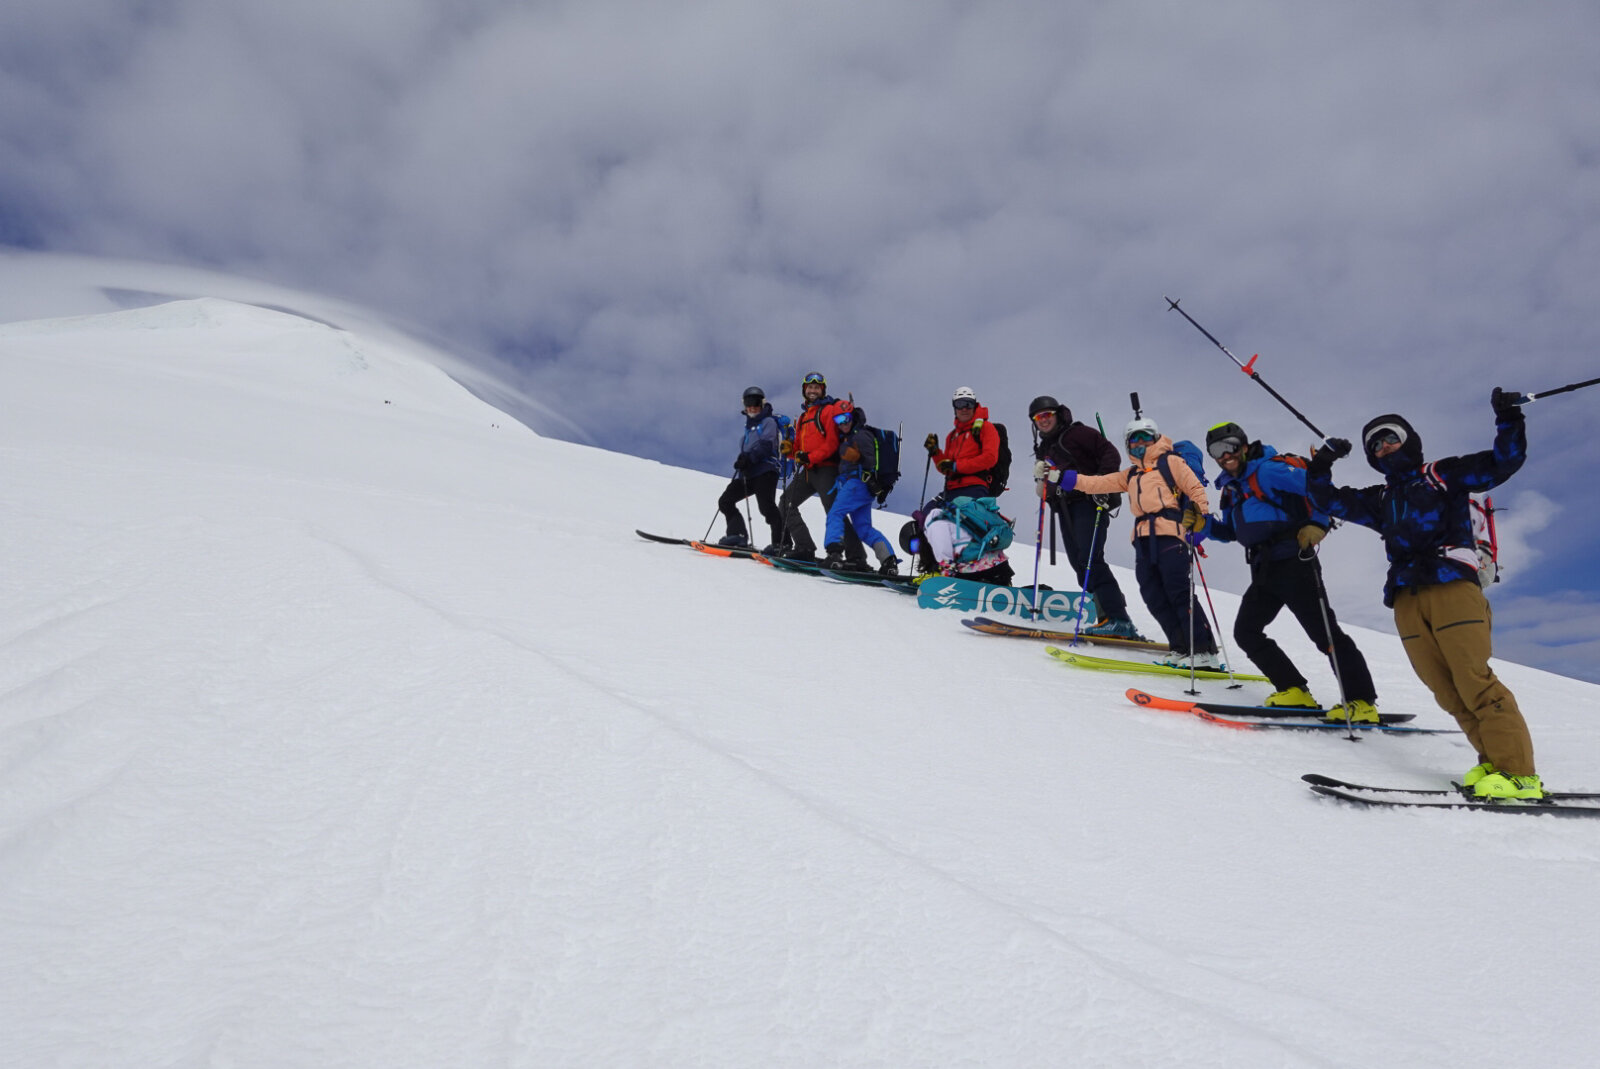 Professionally guided ski mountaineering trips in Chile.